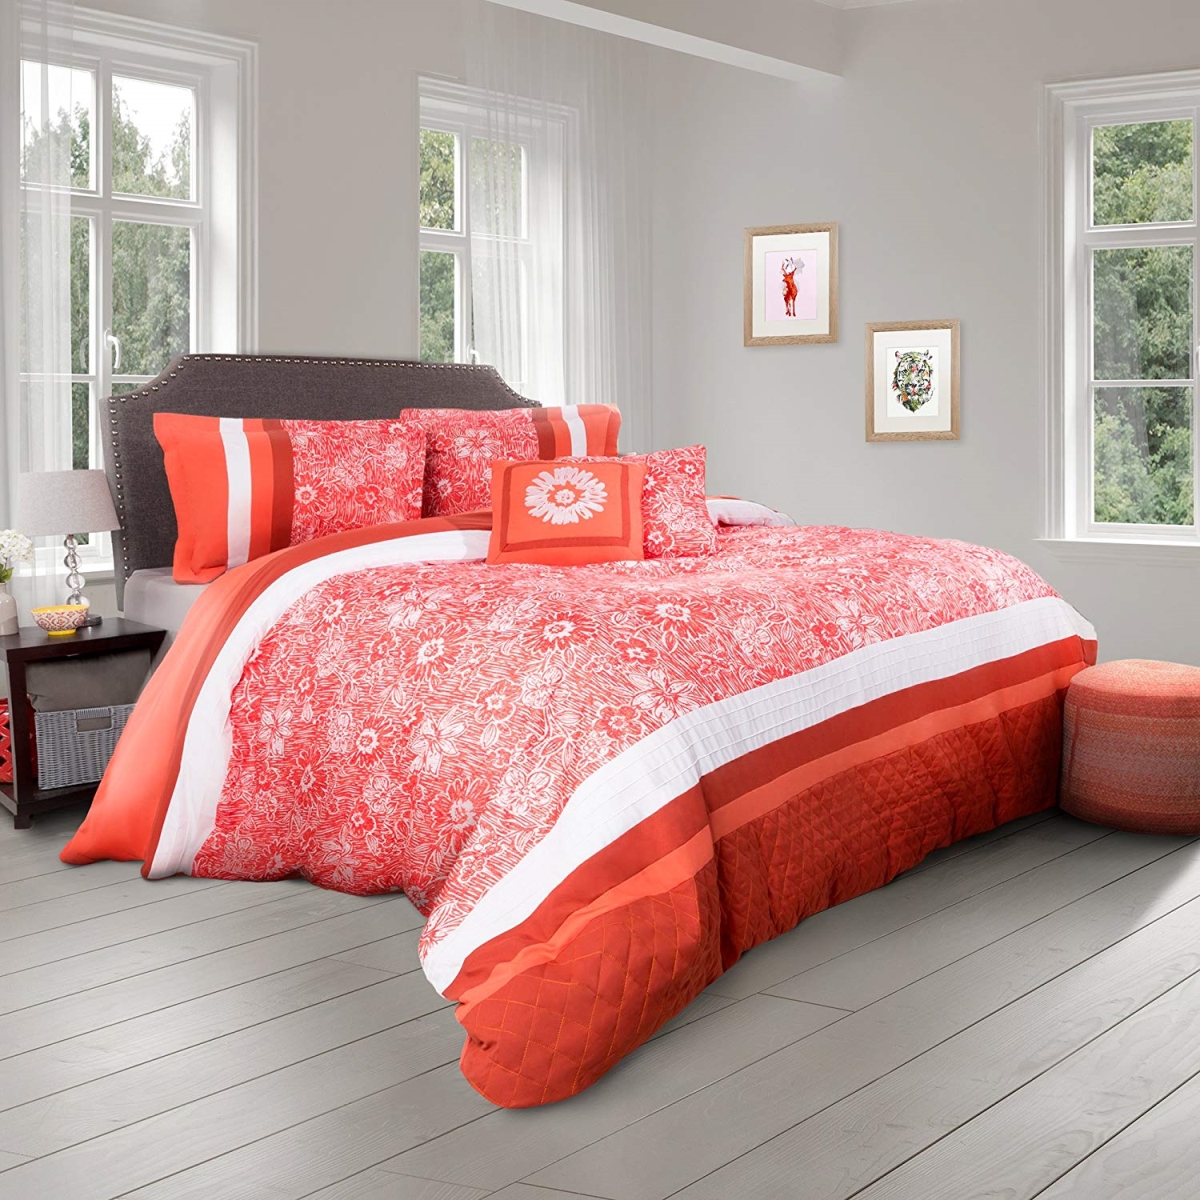 66A-92627 5 Piece Bedding with 2 Decorative Pillows Comforter Set, Queen Size - Red